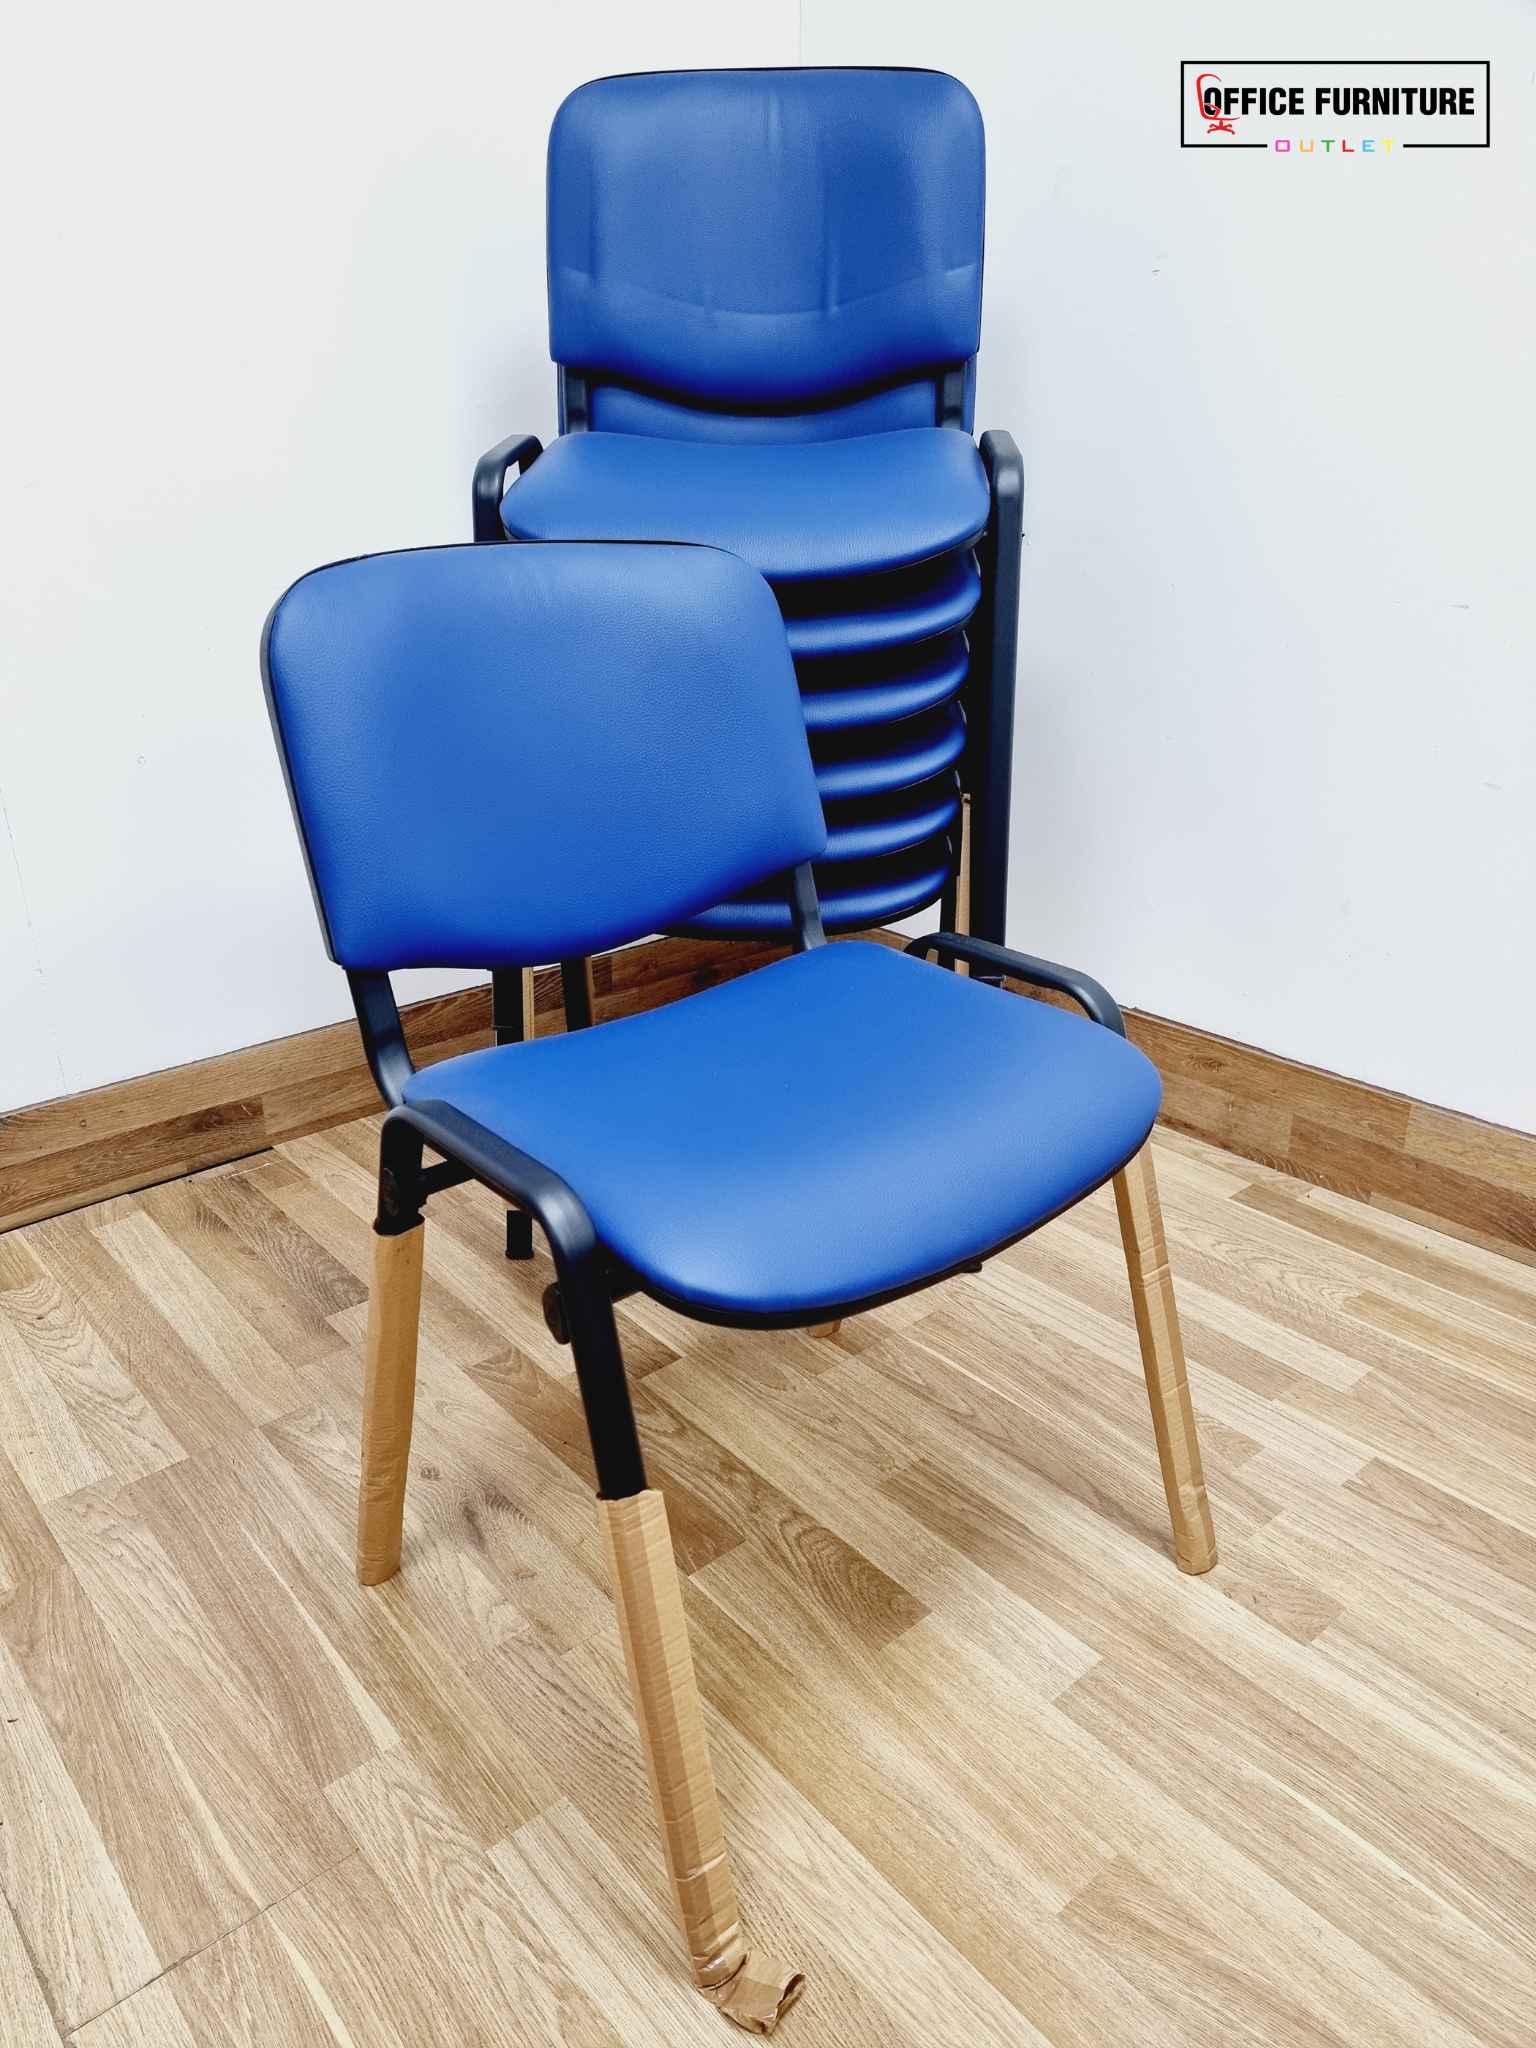 Club Stacking Chairs - Blue Leather With Black Legs